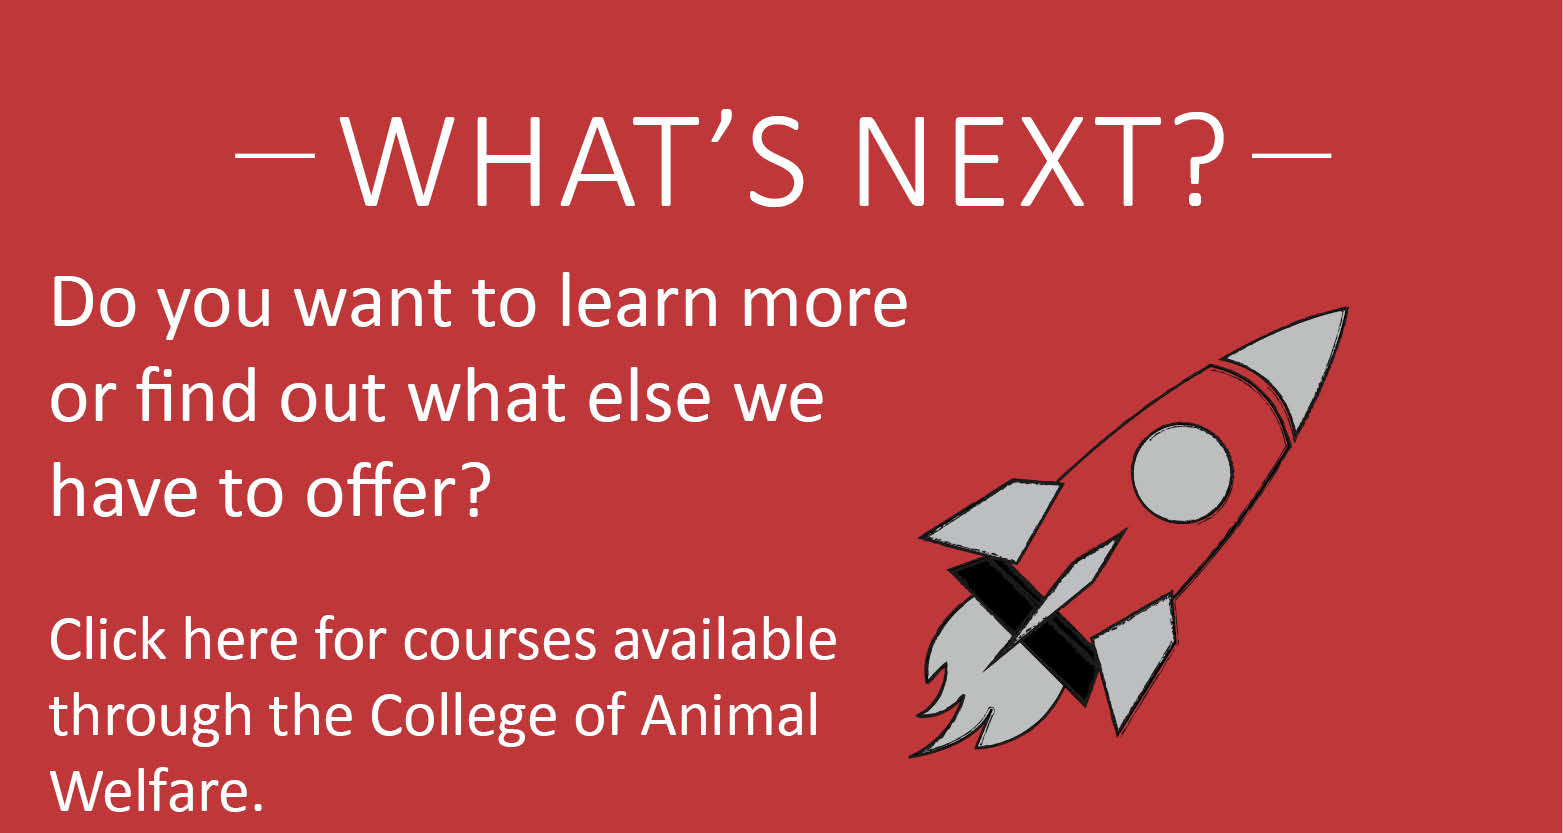 More courses at The College of Animal Welfare